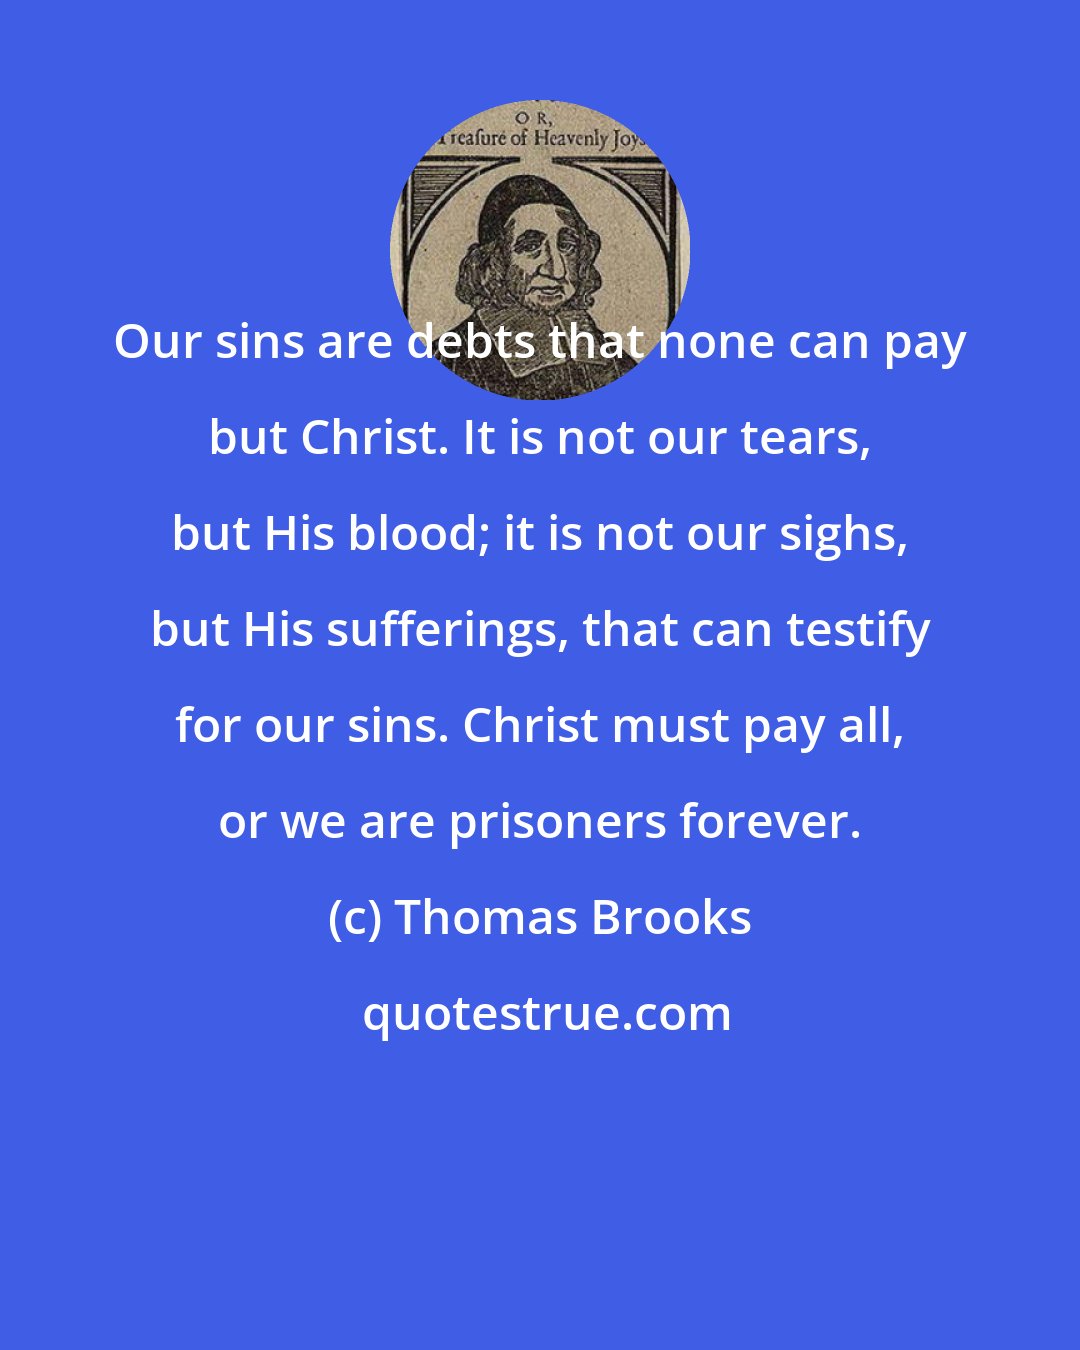 Thomas Brooks: Our sins are debts that none can pay but Christ. It is not our tears, but His blood; it is not our sighs, but His sufferings, that can testify for our sins. Christ must pay all, or we are prisoners forever.